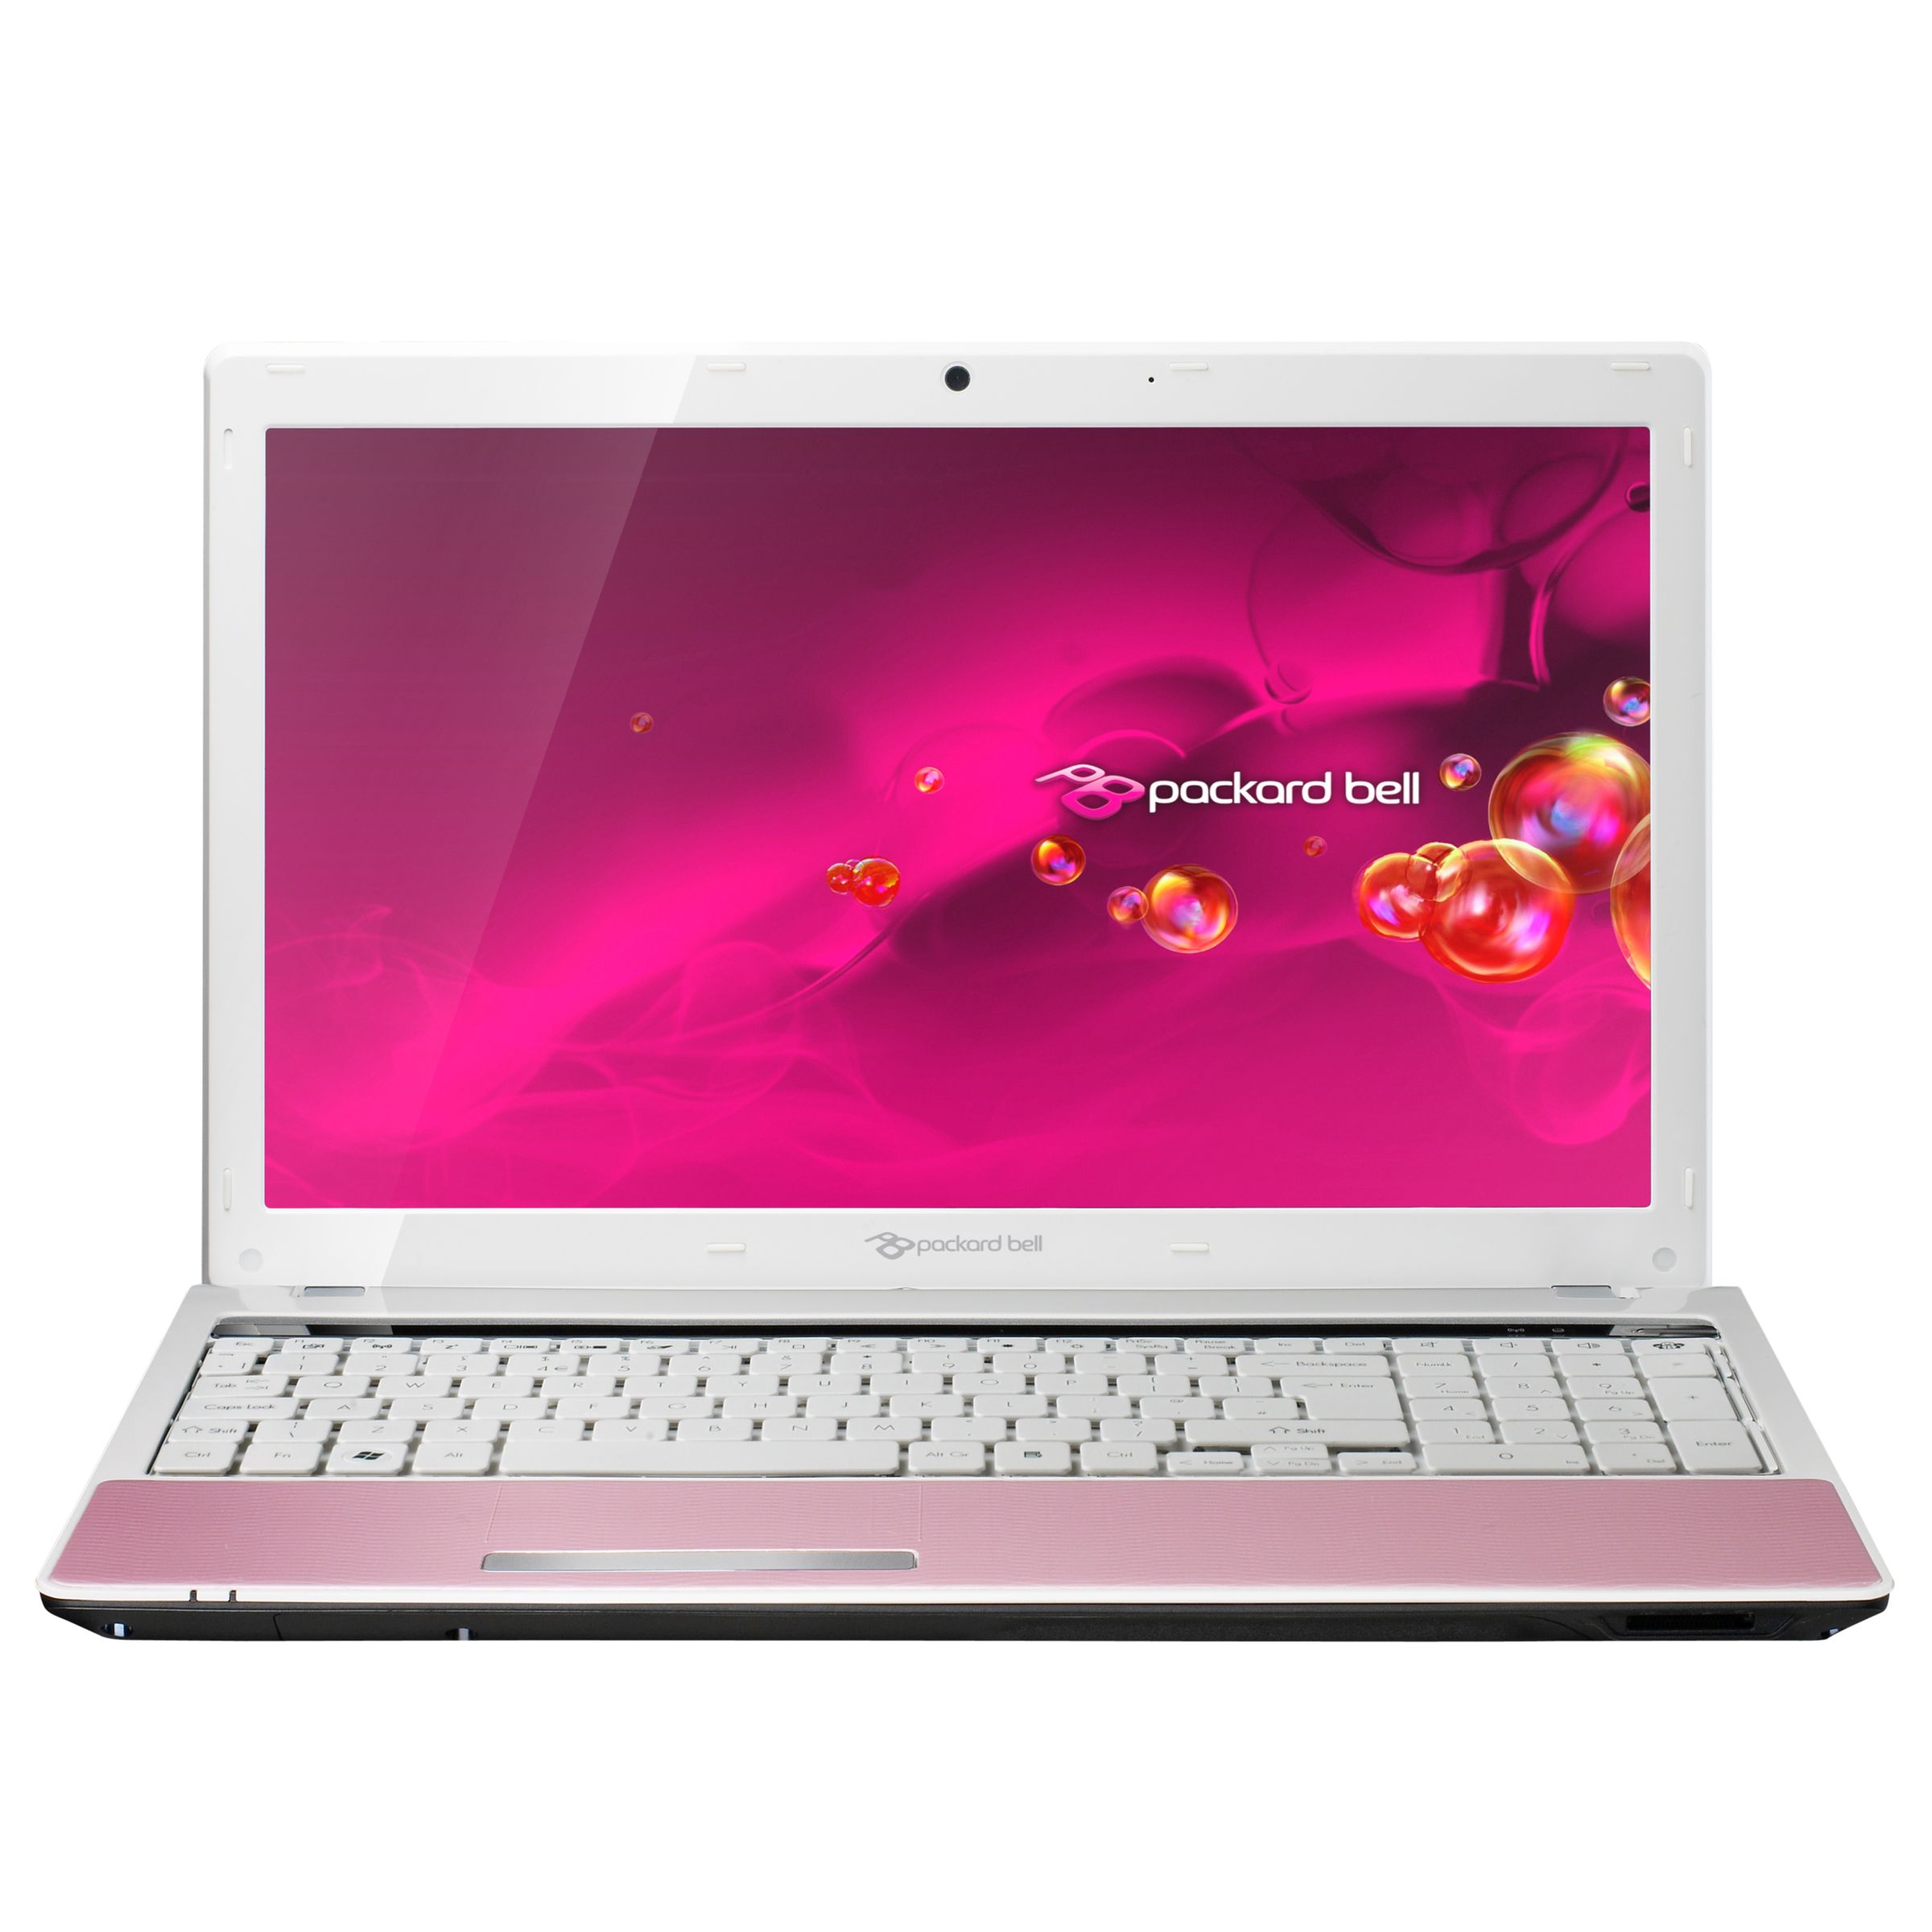 Packard Bell EasyNote TM01-RB-015 Laptop, AMD V, 250GB, 2.1GHz, 2GB RAM with 15.6 Inch Display at John Lewis